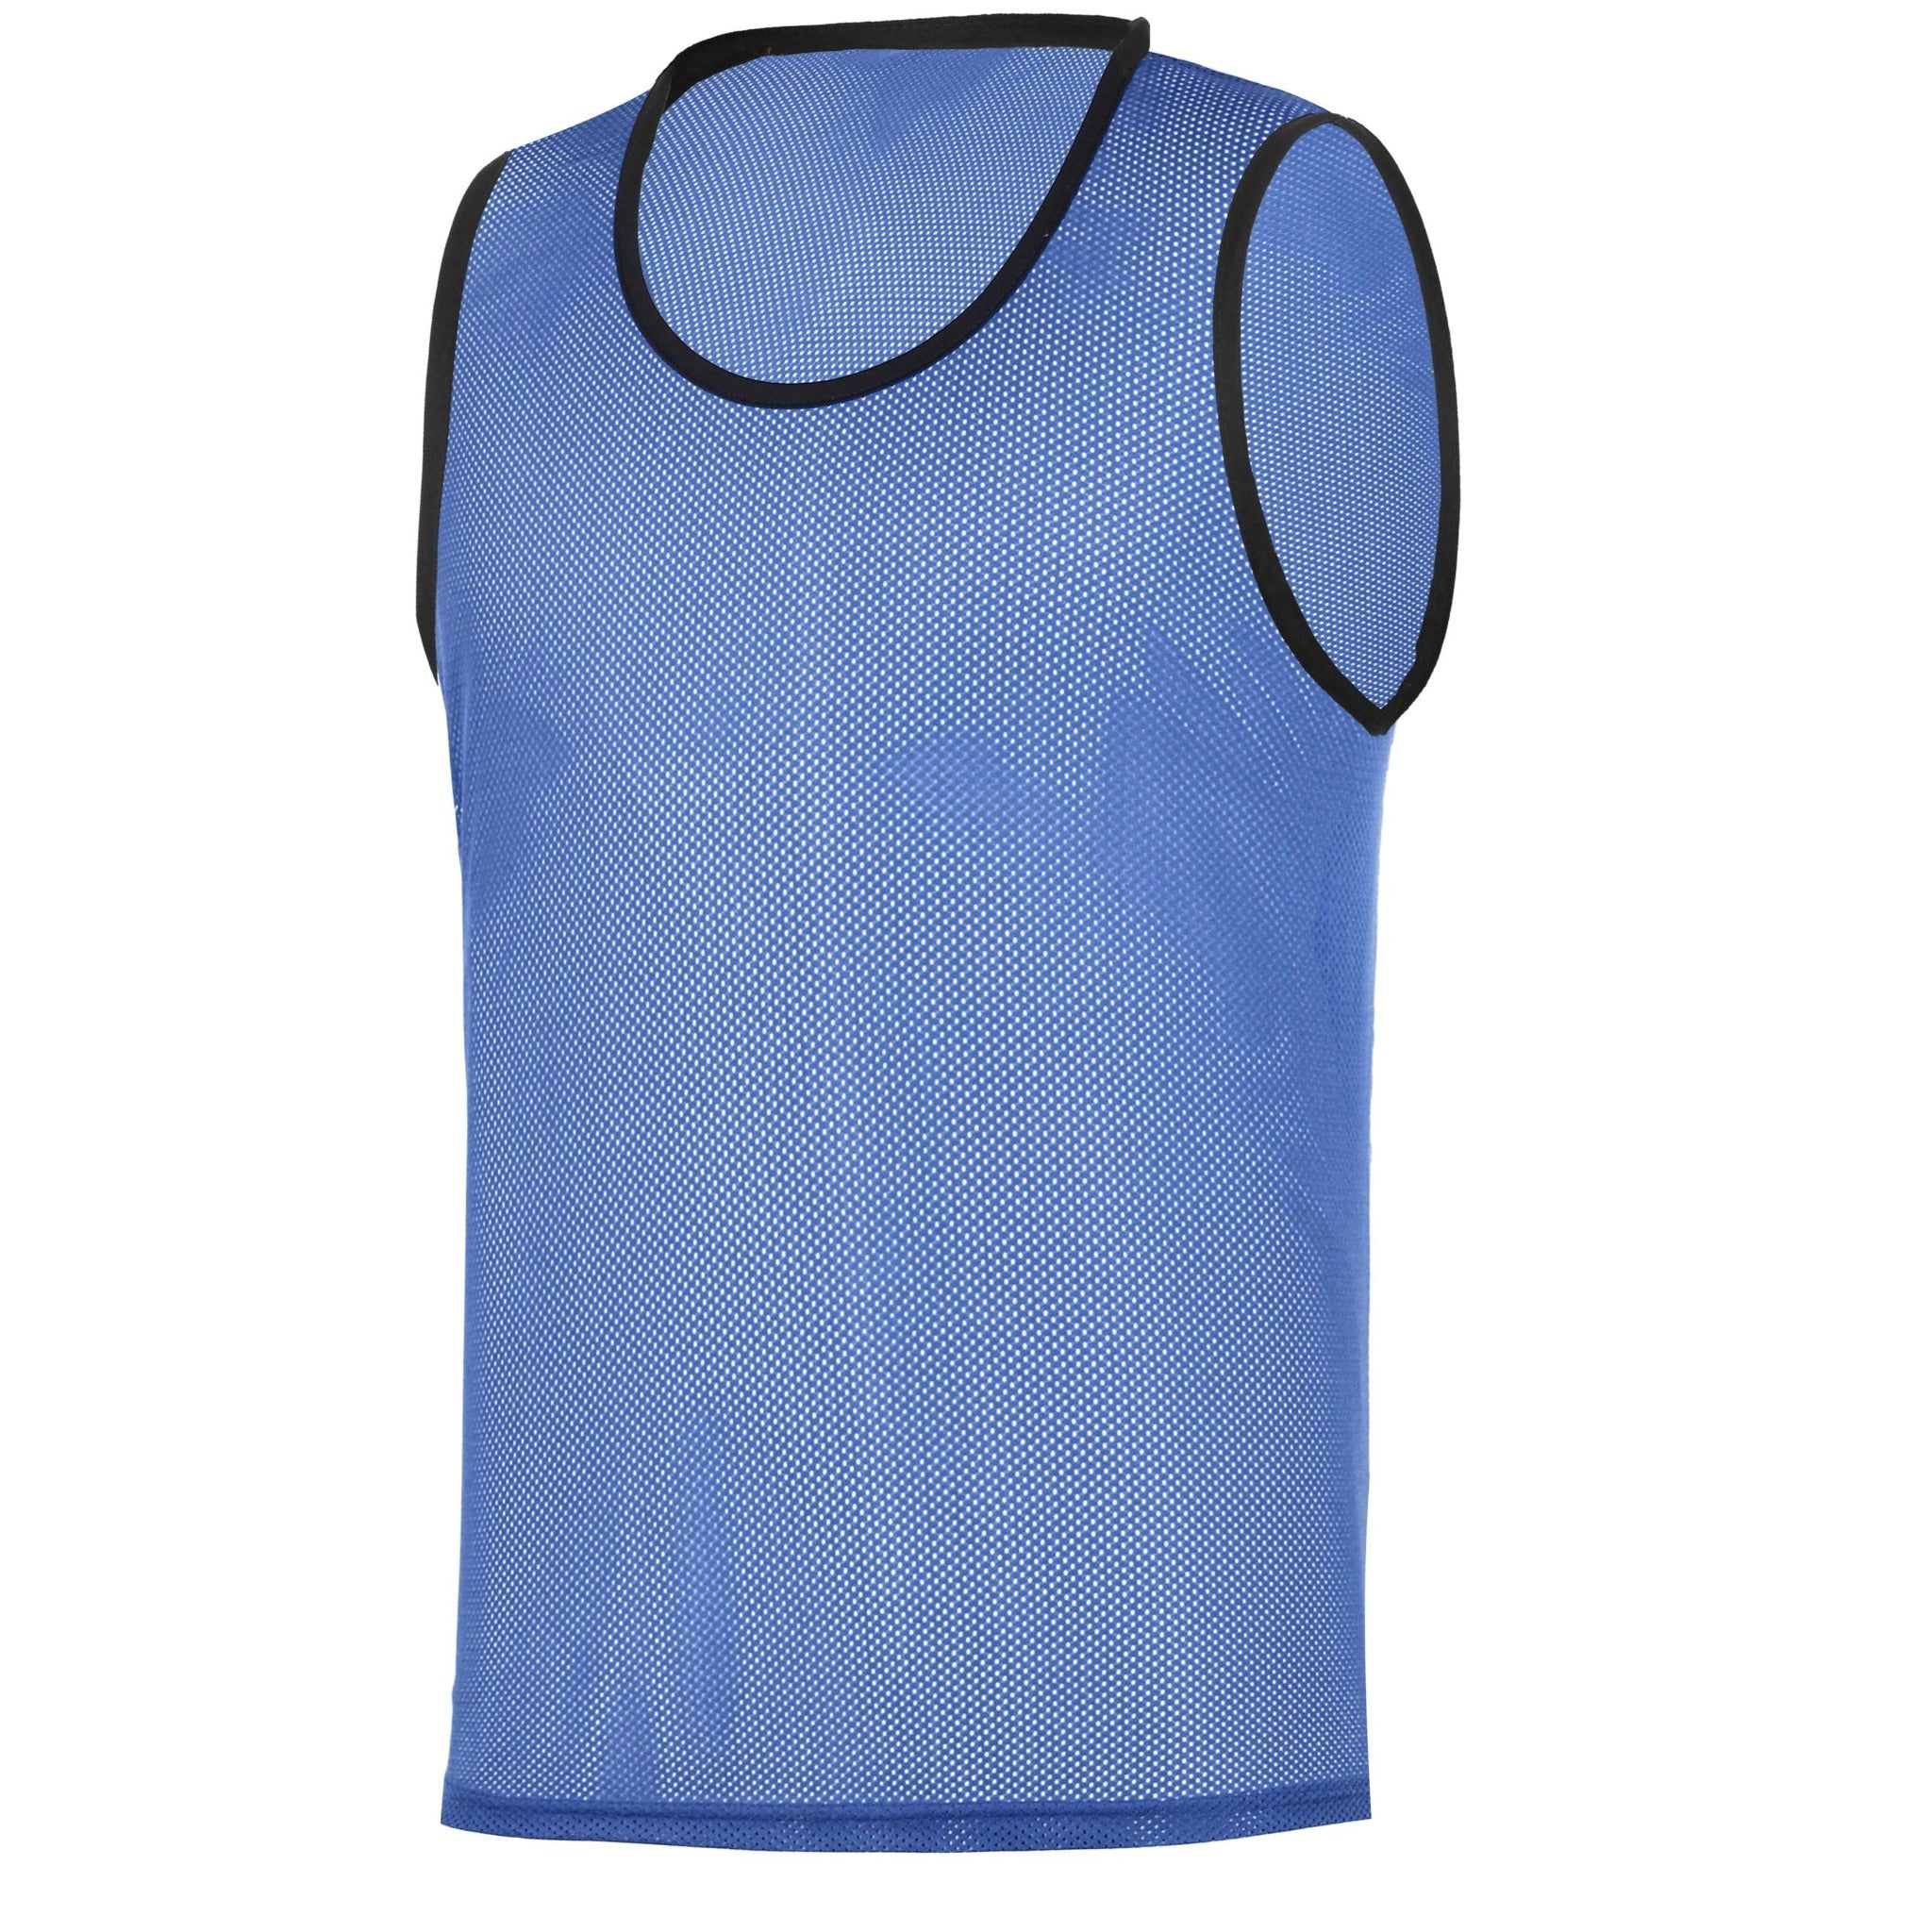 Cover Up Mesh Tank Top pattern by the Good Shnit